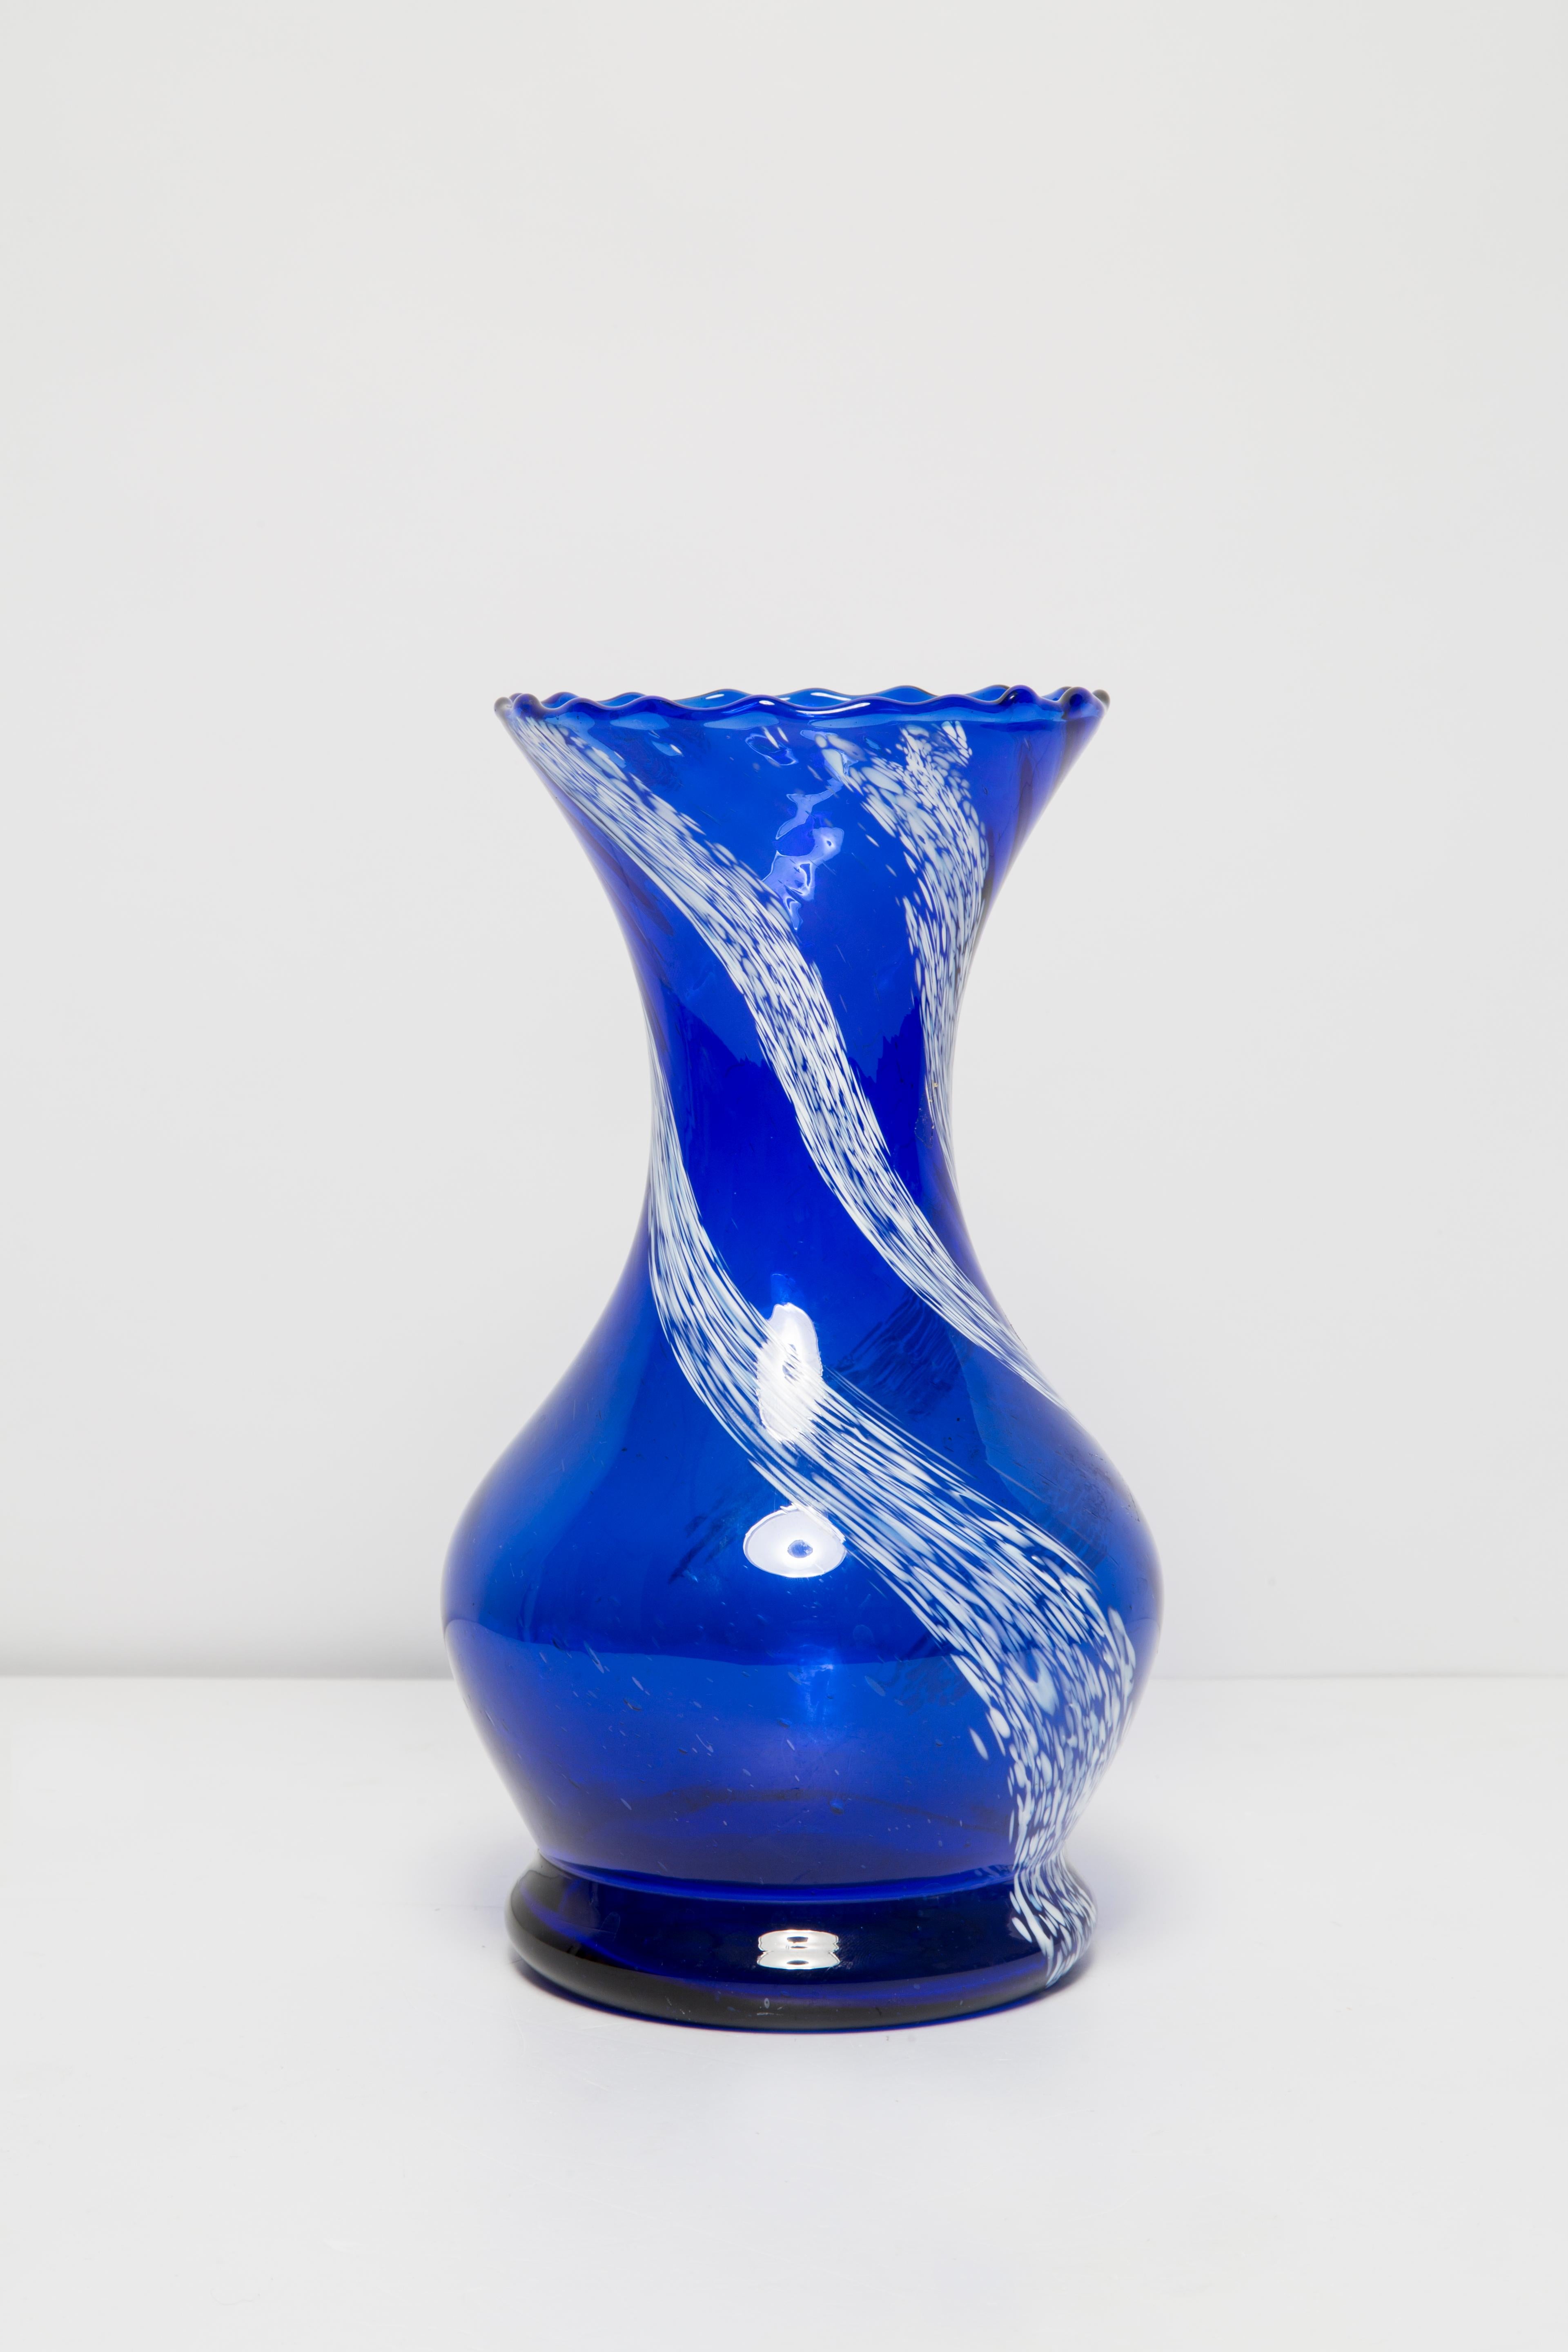 Mid Century Vintage Blue and White Artistic Glass Vase, Europe, 1970s For Sale 1